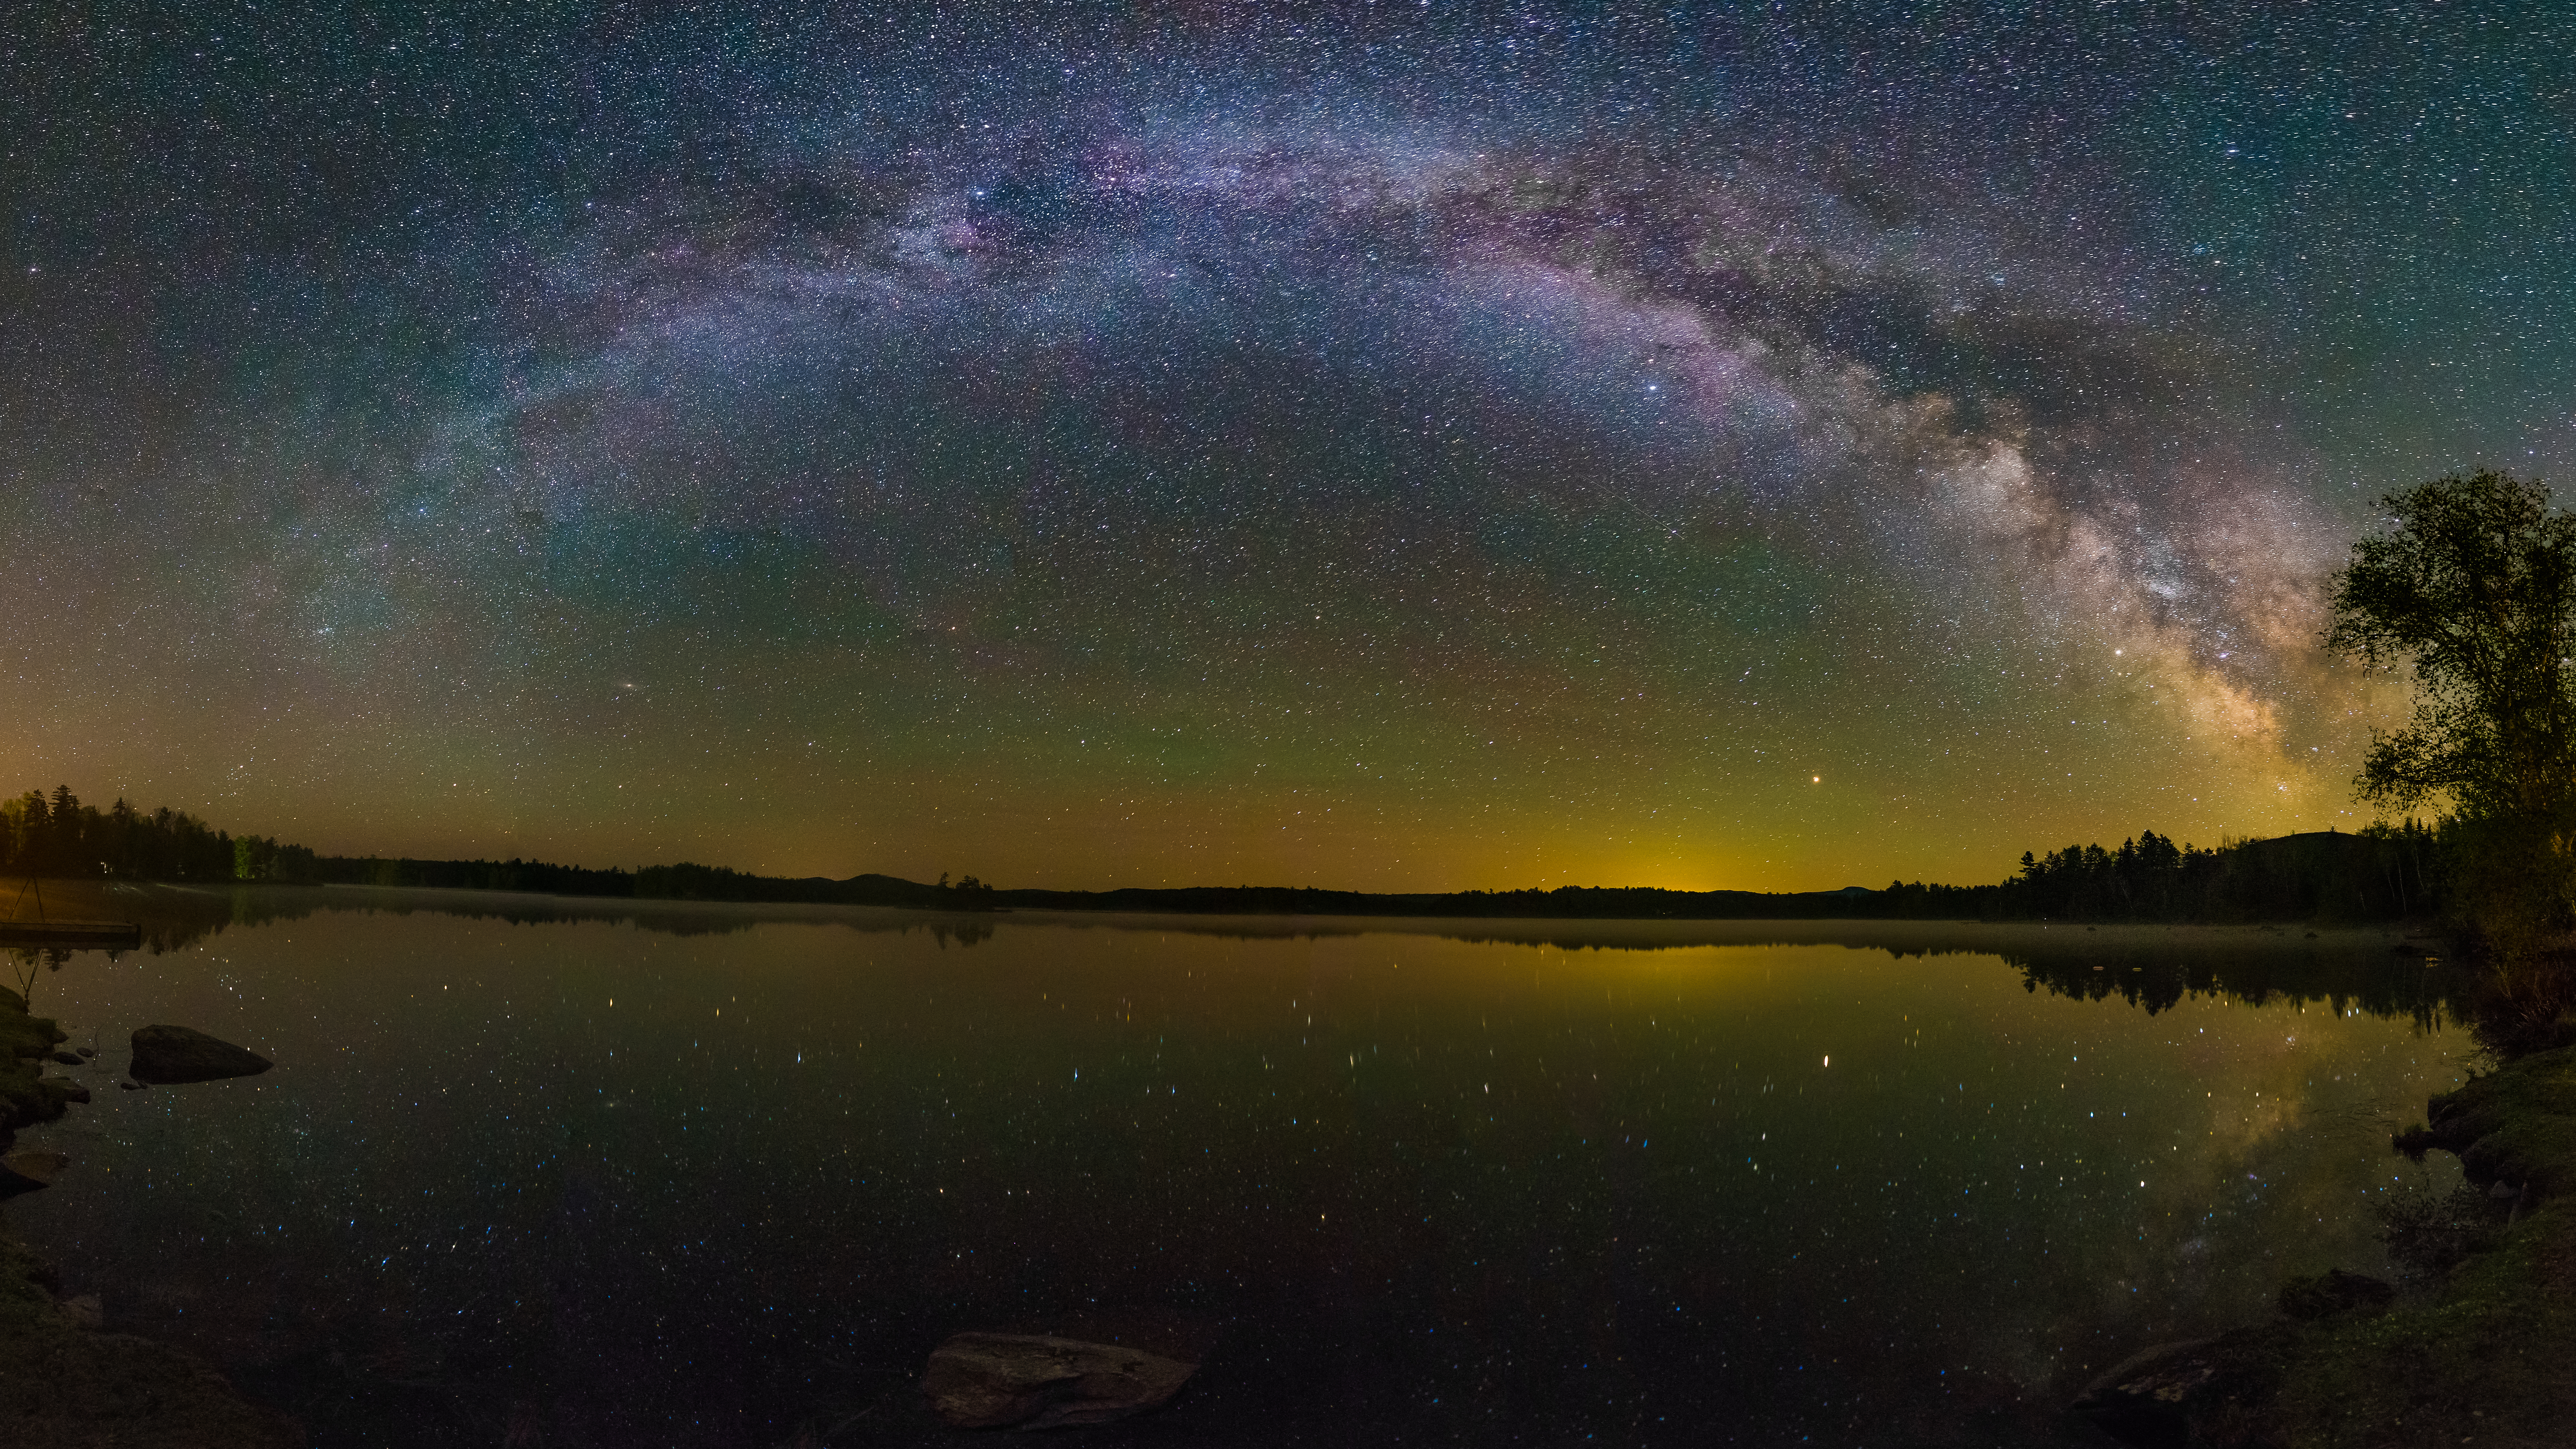 A night time photograph of a lake as the last daylight fades over the horizon under a greenish black sky dense with stars and purple northern lights